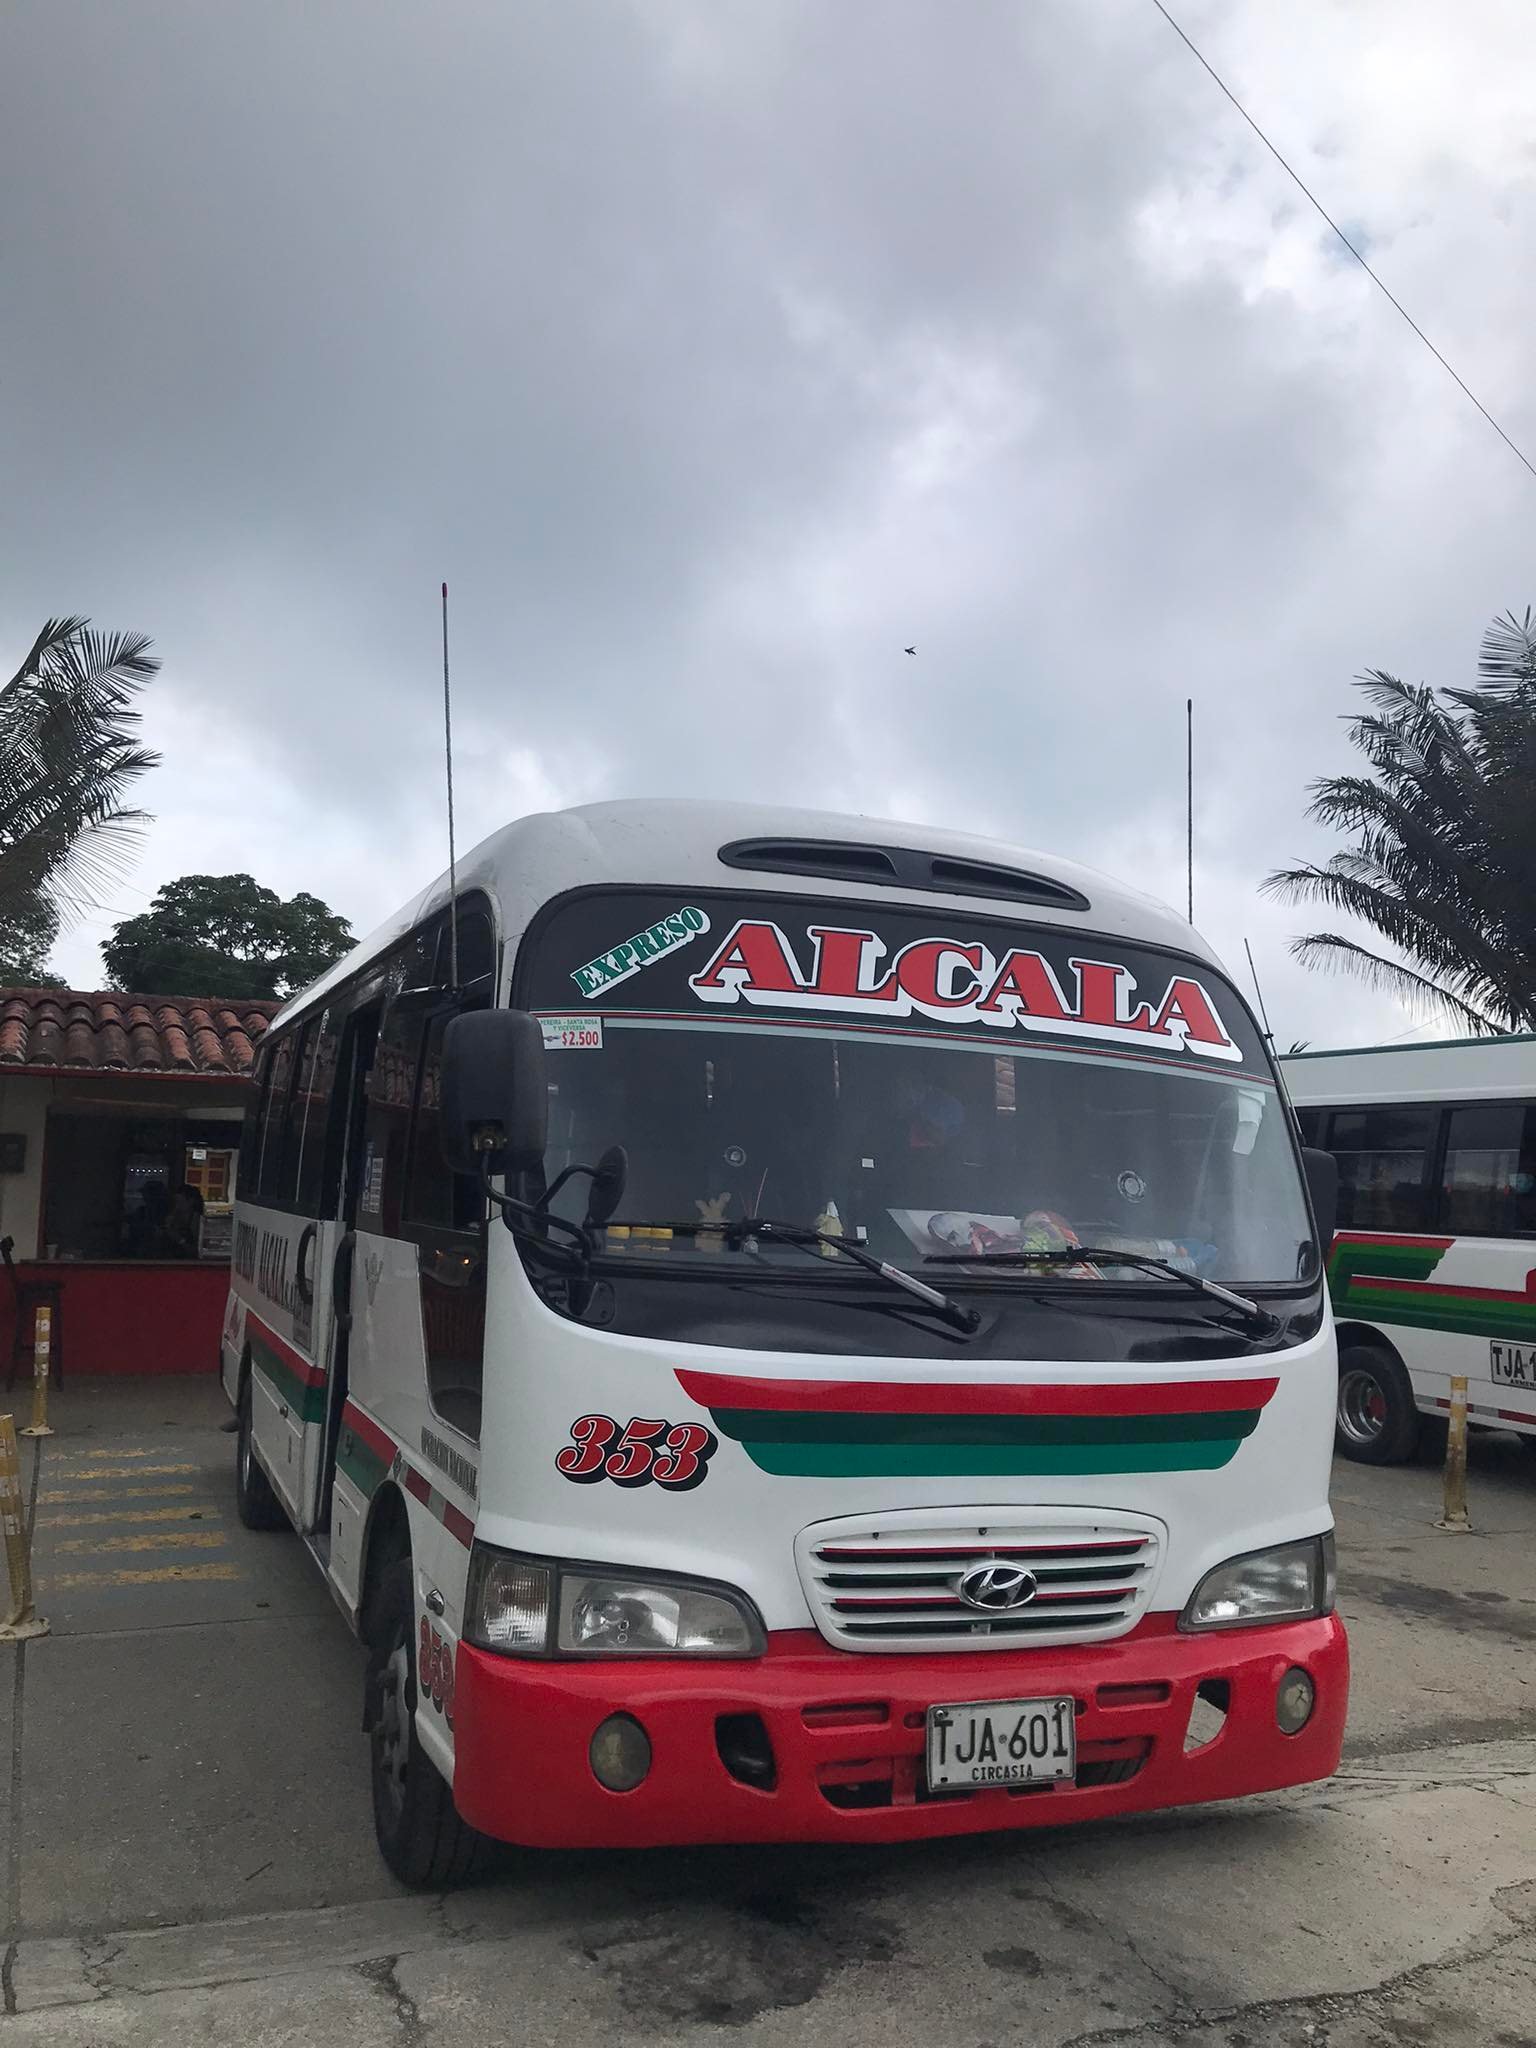 How To Get From Salento to Pereira - All Possible Ways, cheapest way from Salento to Pereira, Salento to Pereira bus, Salento to Pereira, bus schedule from Salento to Pereira, Expreso Alcala from Salento to Pereira, taxi from Salento to Pereira